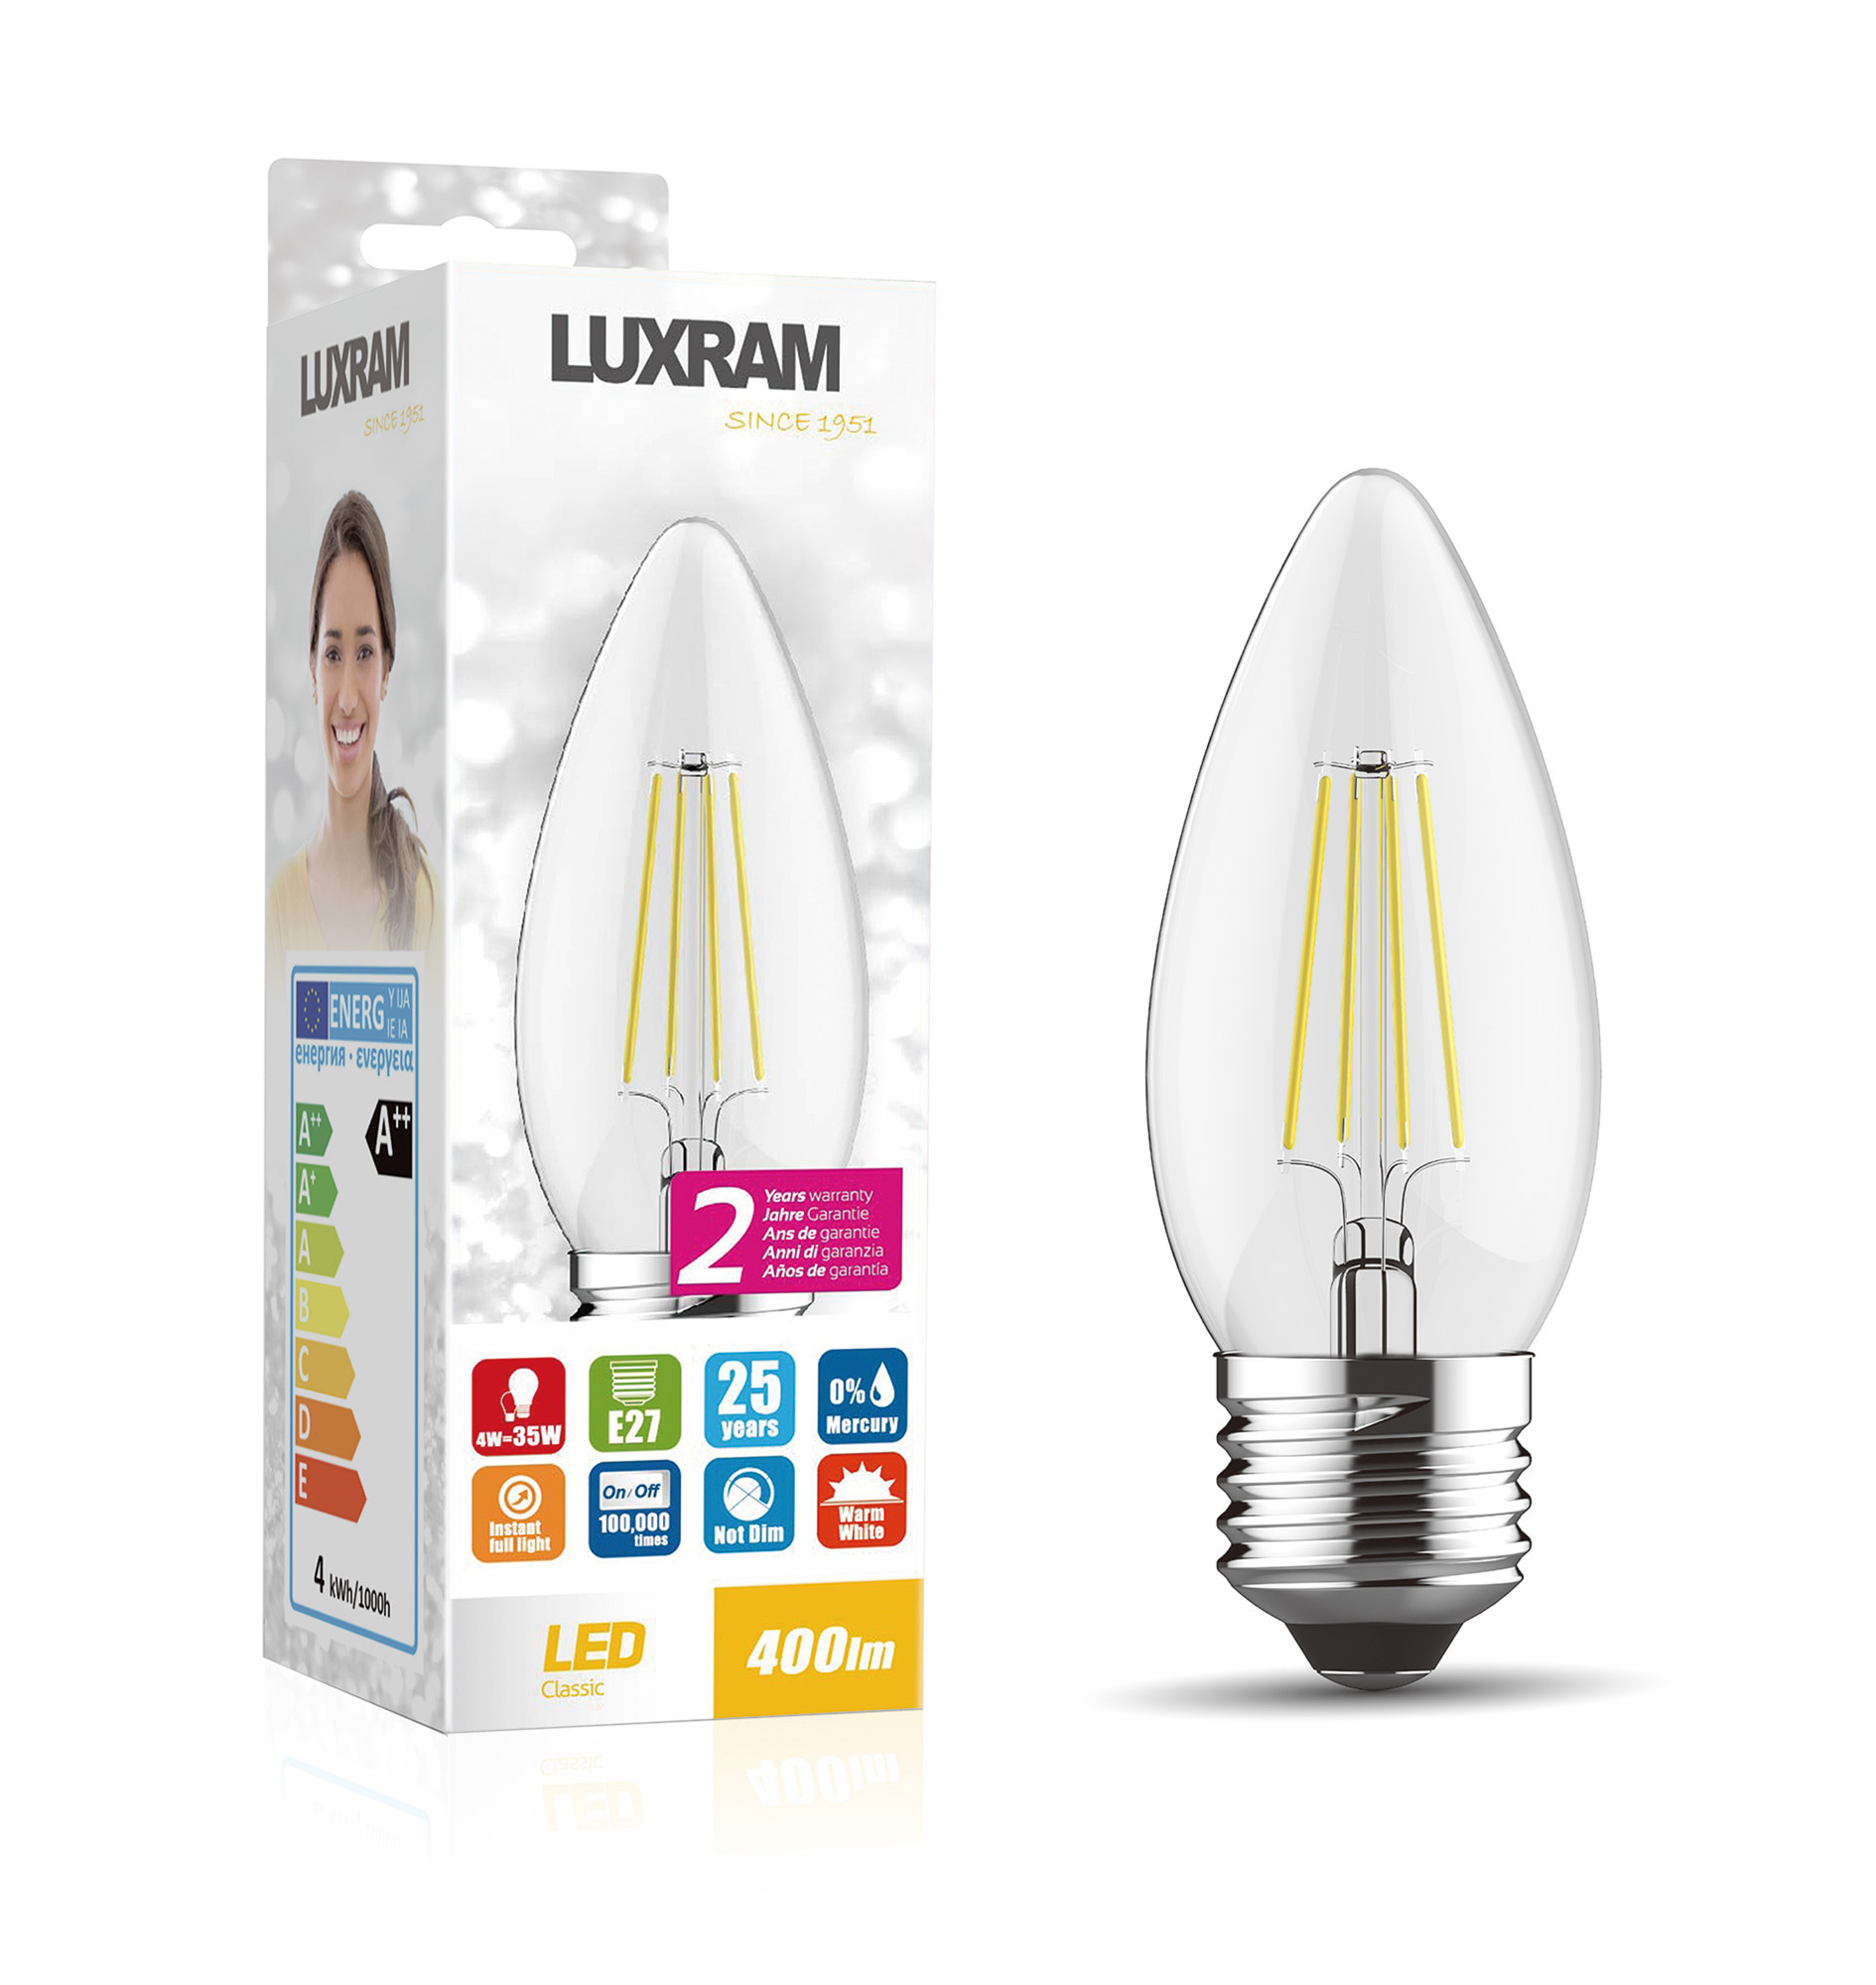 Value Classic LED Lamps Luxram Candle